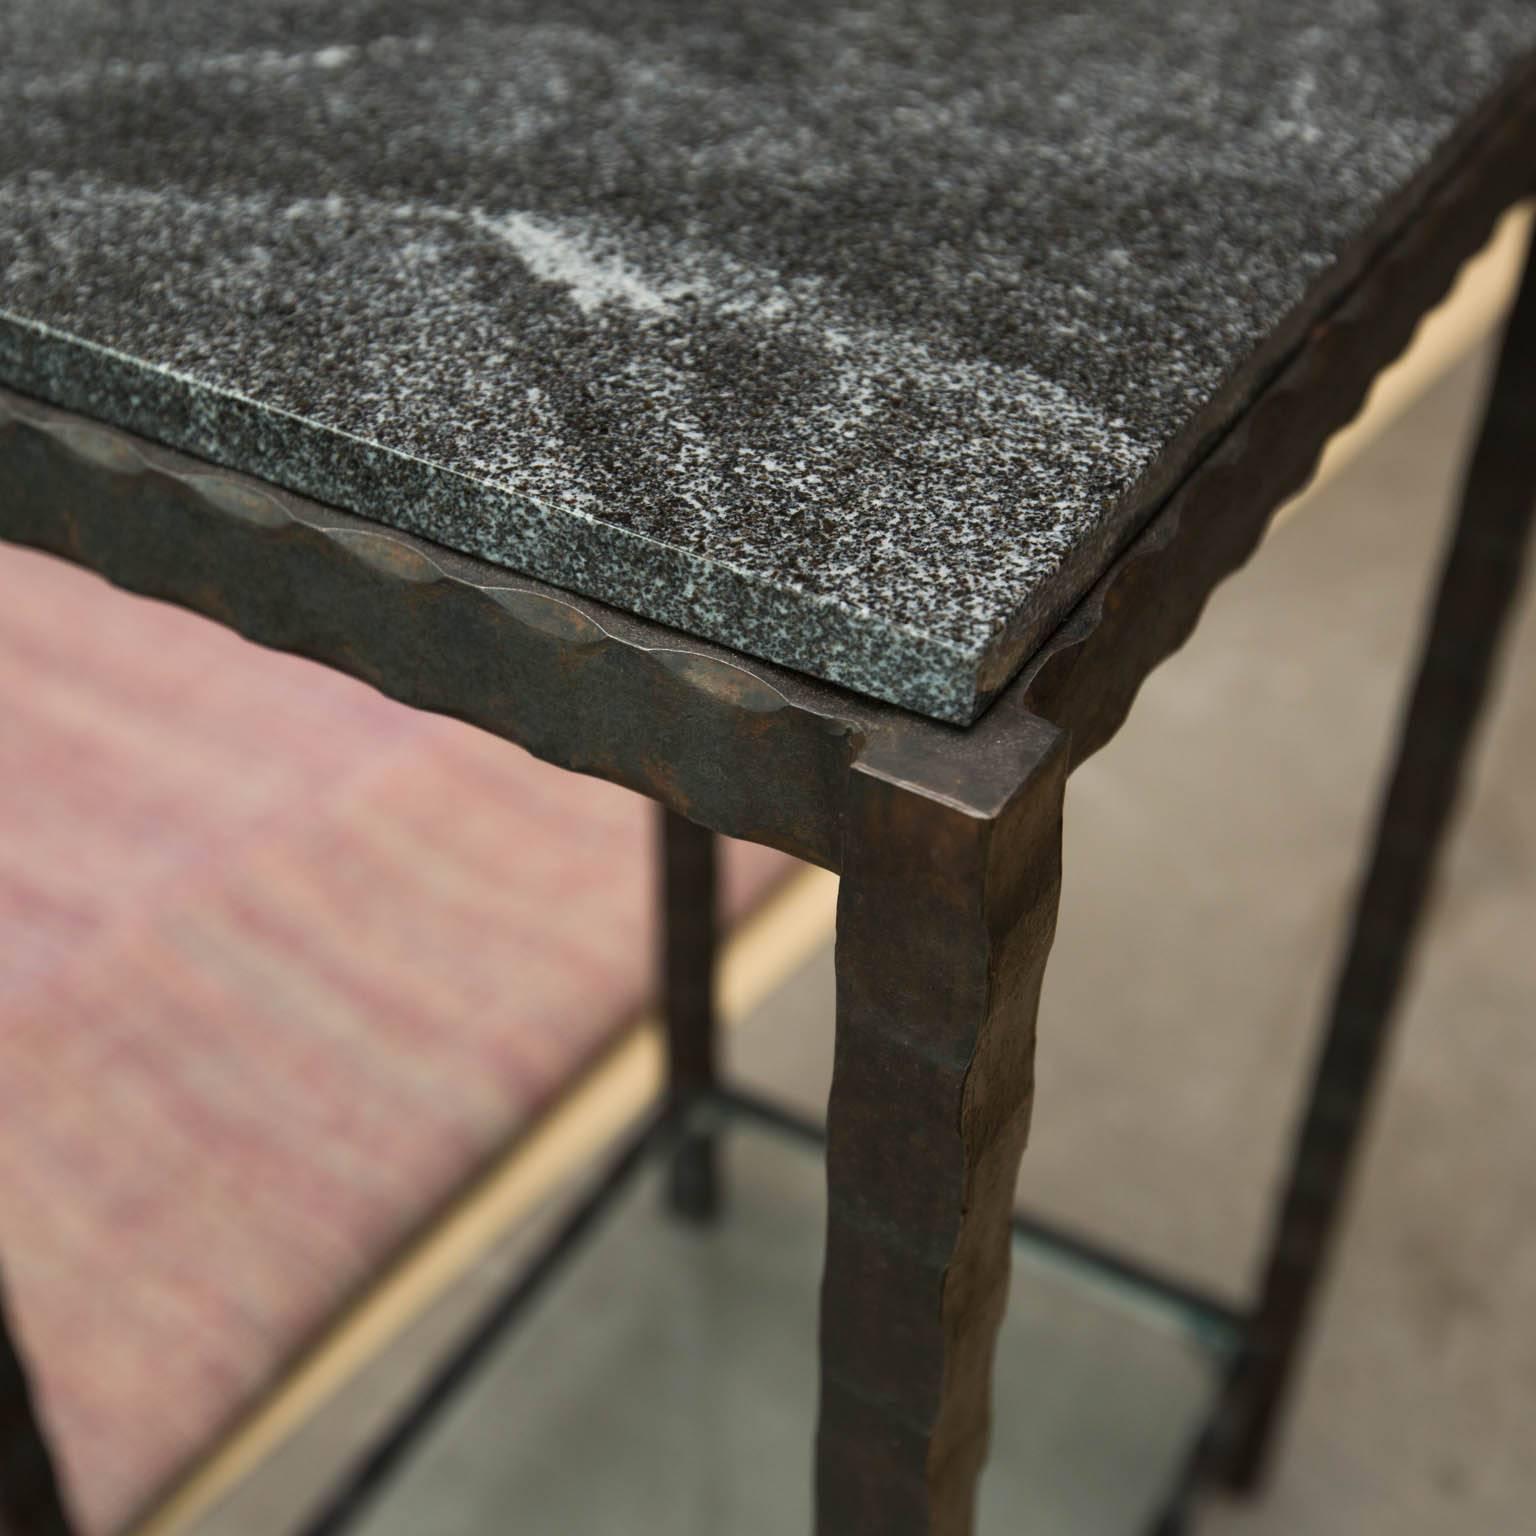 Compact but substantial side table made from hand-forged patterned steel with a forged wave edged granite. Features a single glass shelf.